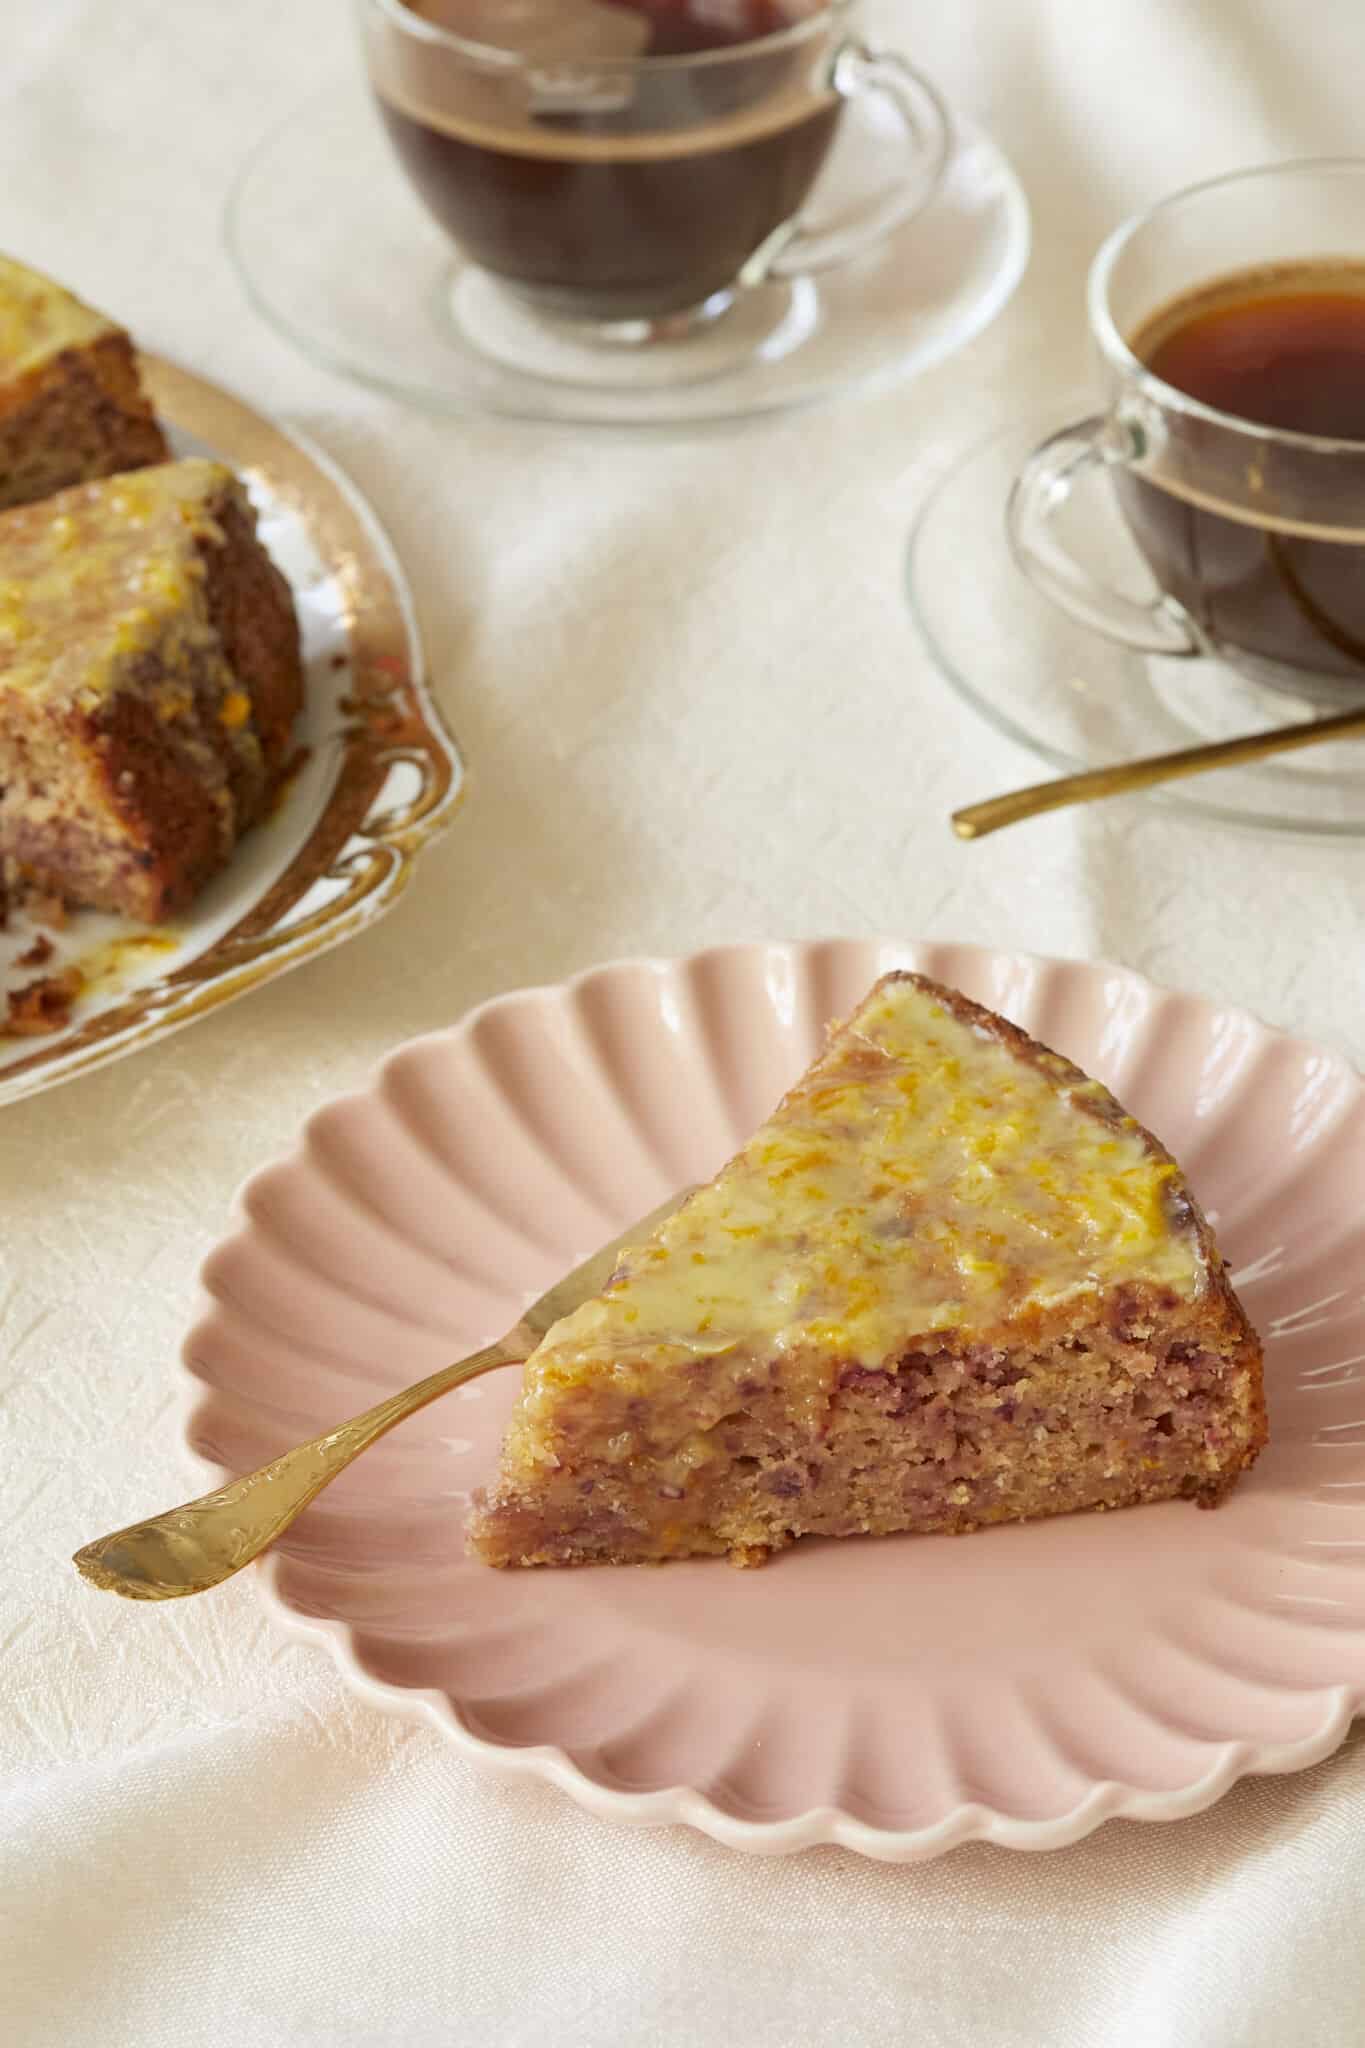 Cranberry Orange Cake is served on a golden-edge platter with two cups of coffee. The slice in front is served on a pink dessert plate, showing the moist interior loaded with cranberries bits and spices. It's covered with glossy lemon glaze which has lemon zest in.